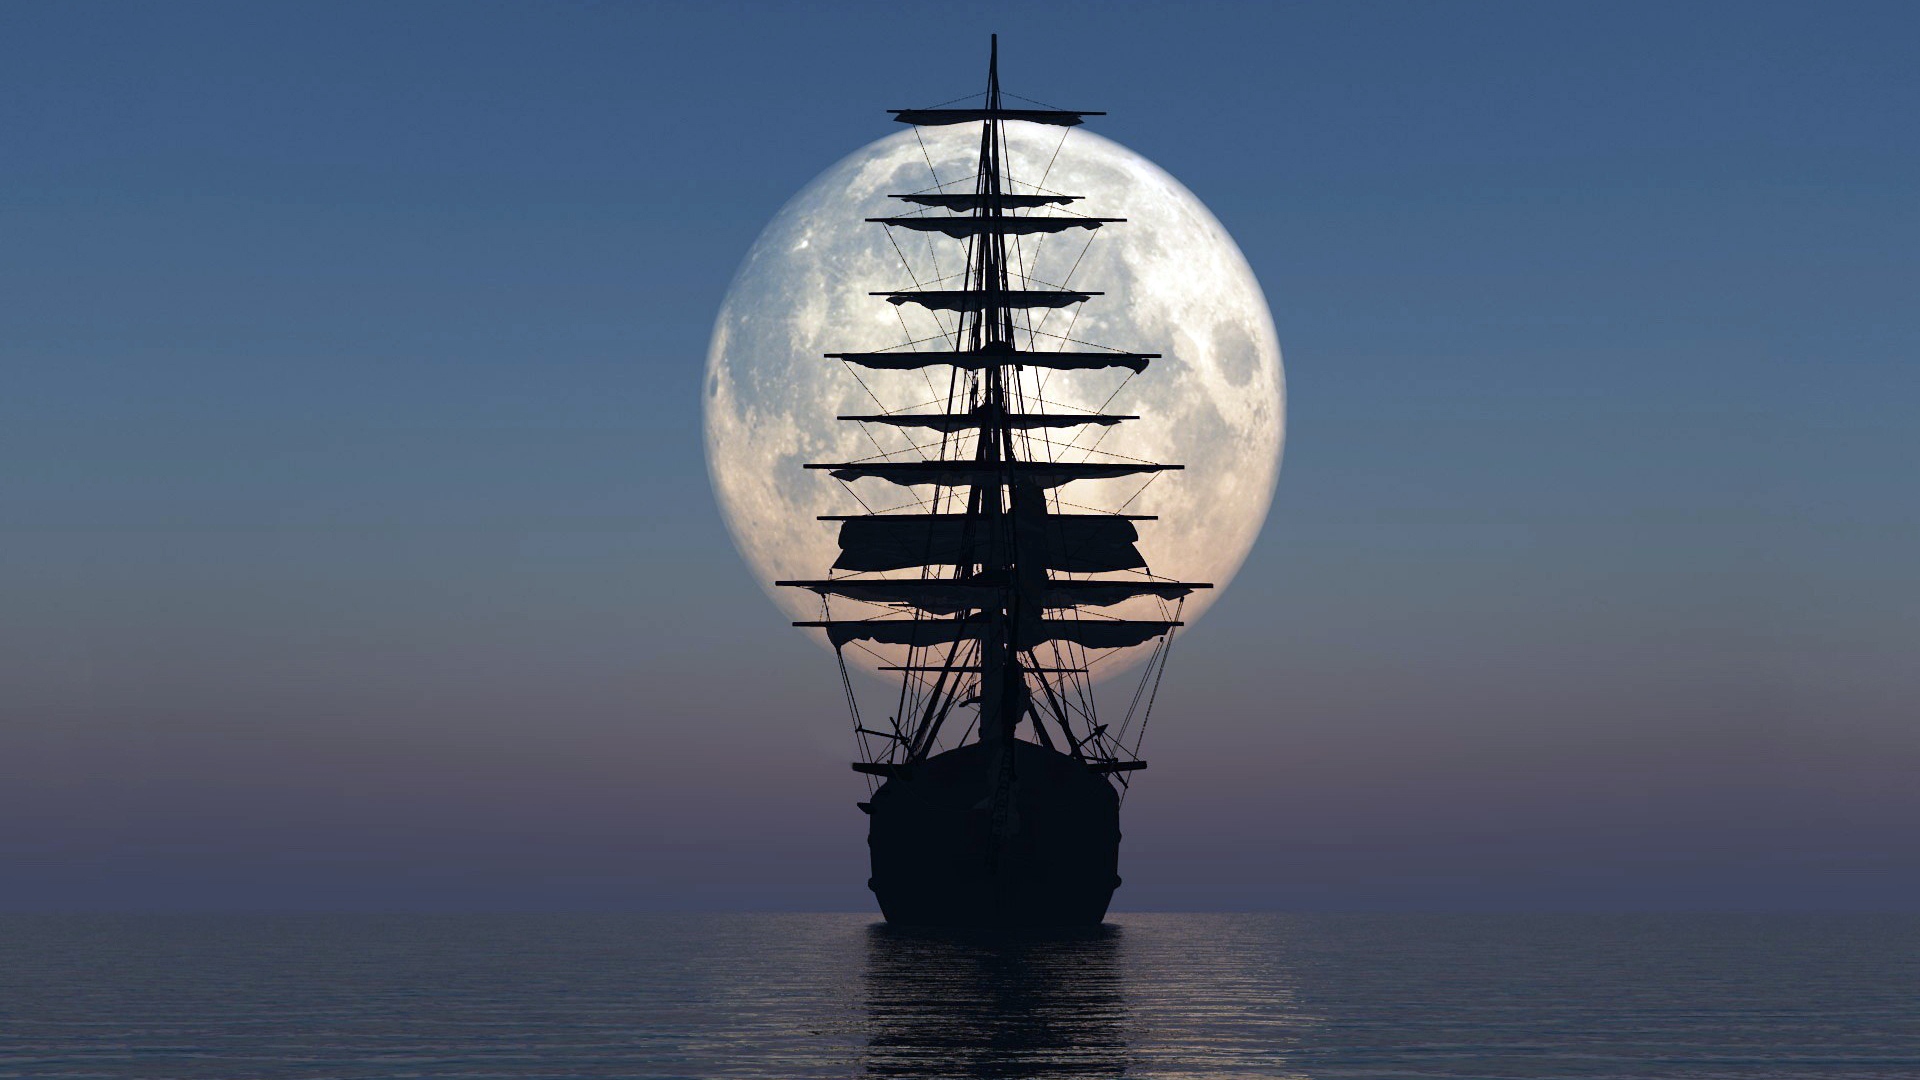 Free photo The silhouette of a large sailing ship against the moon.